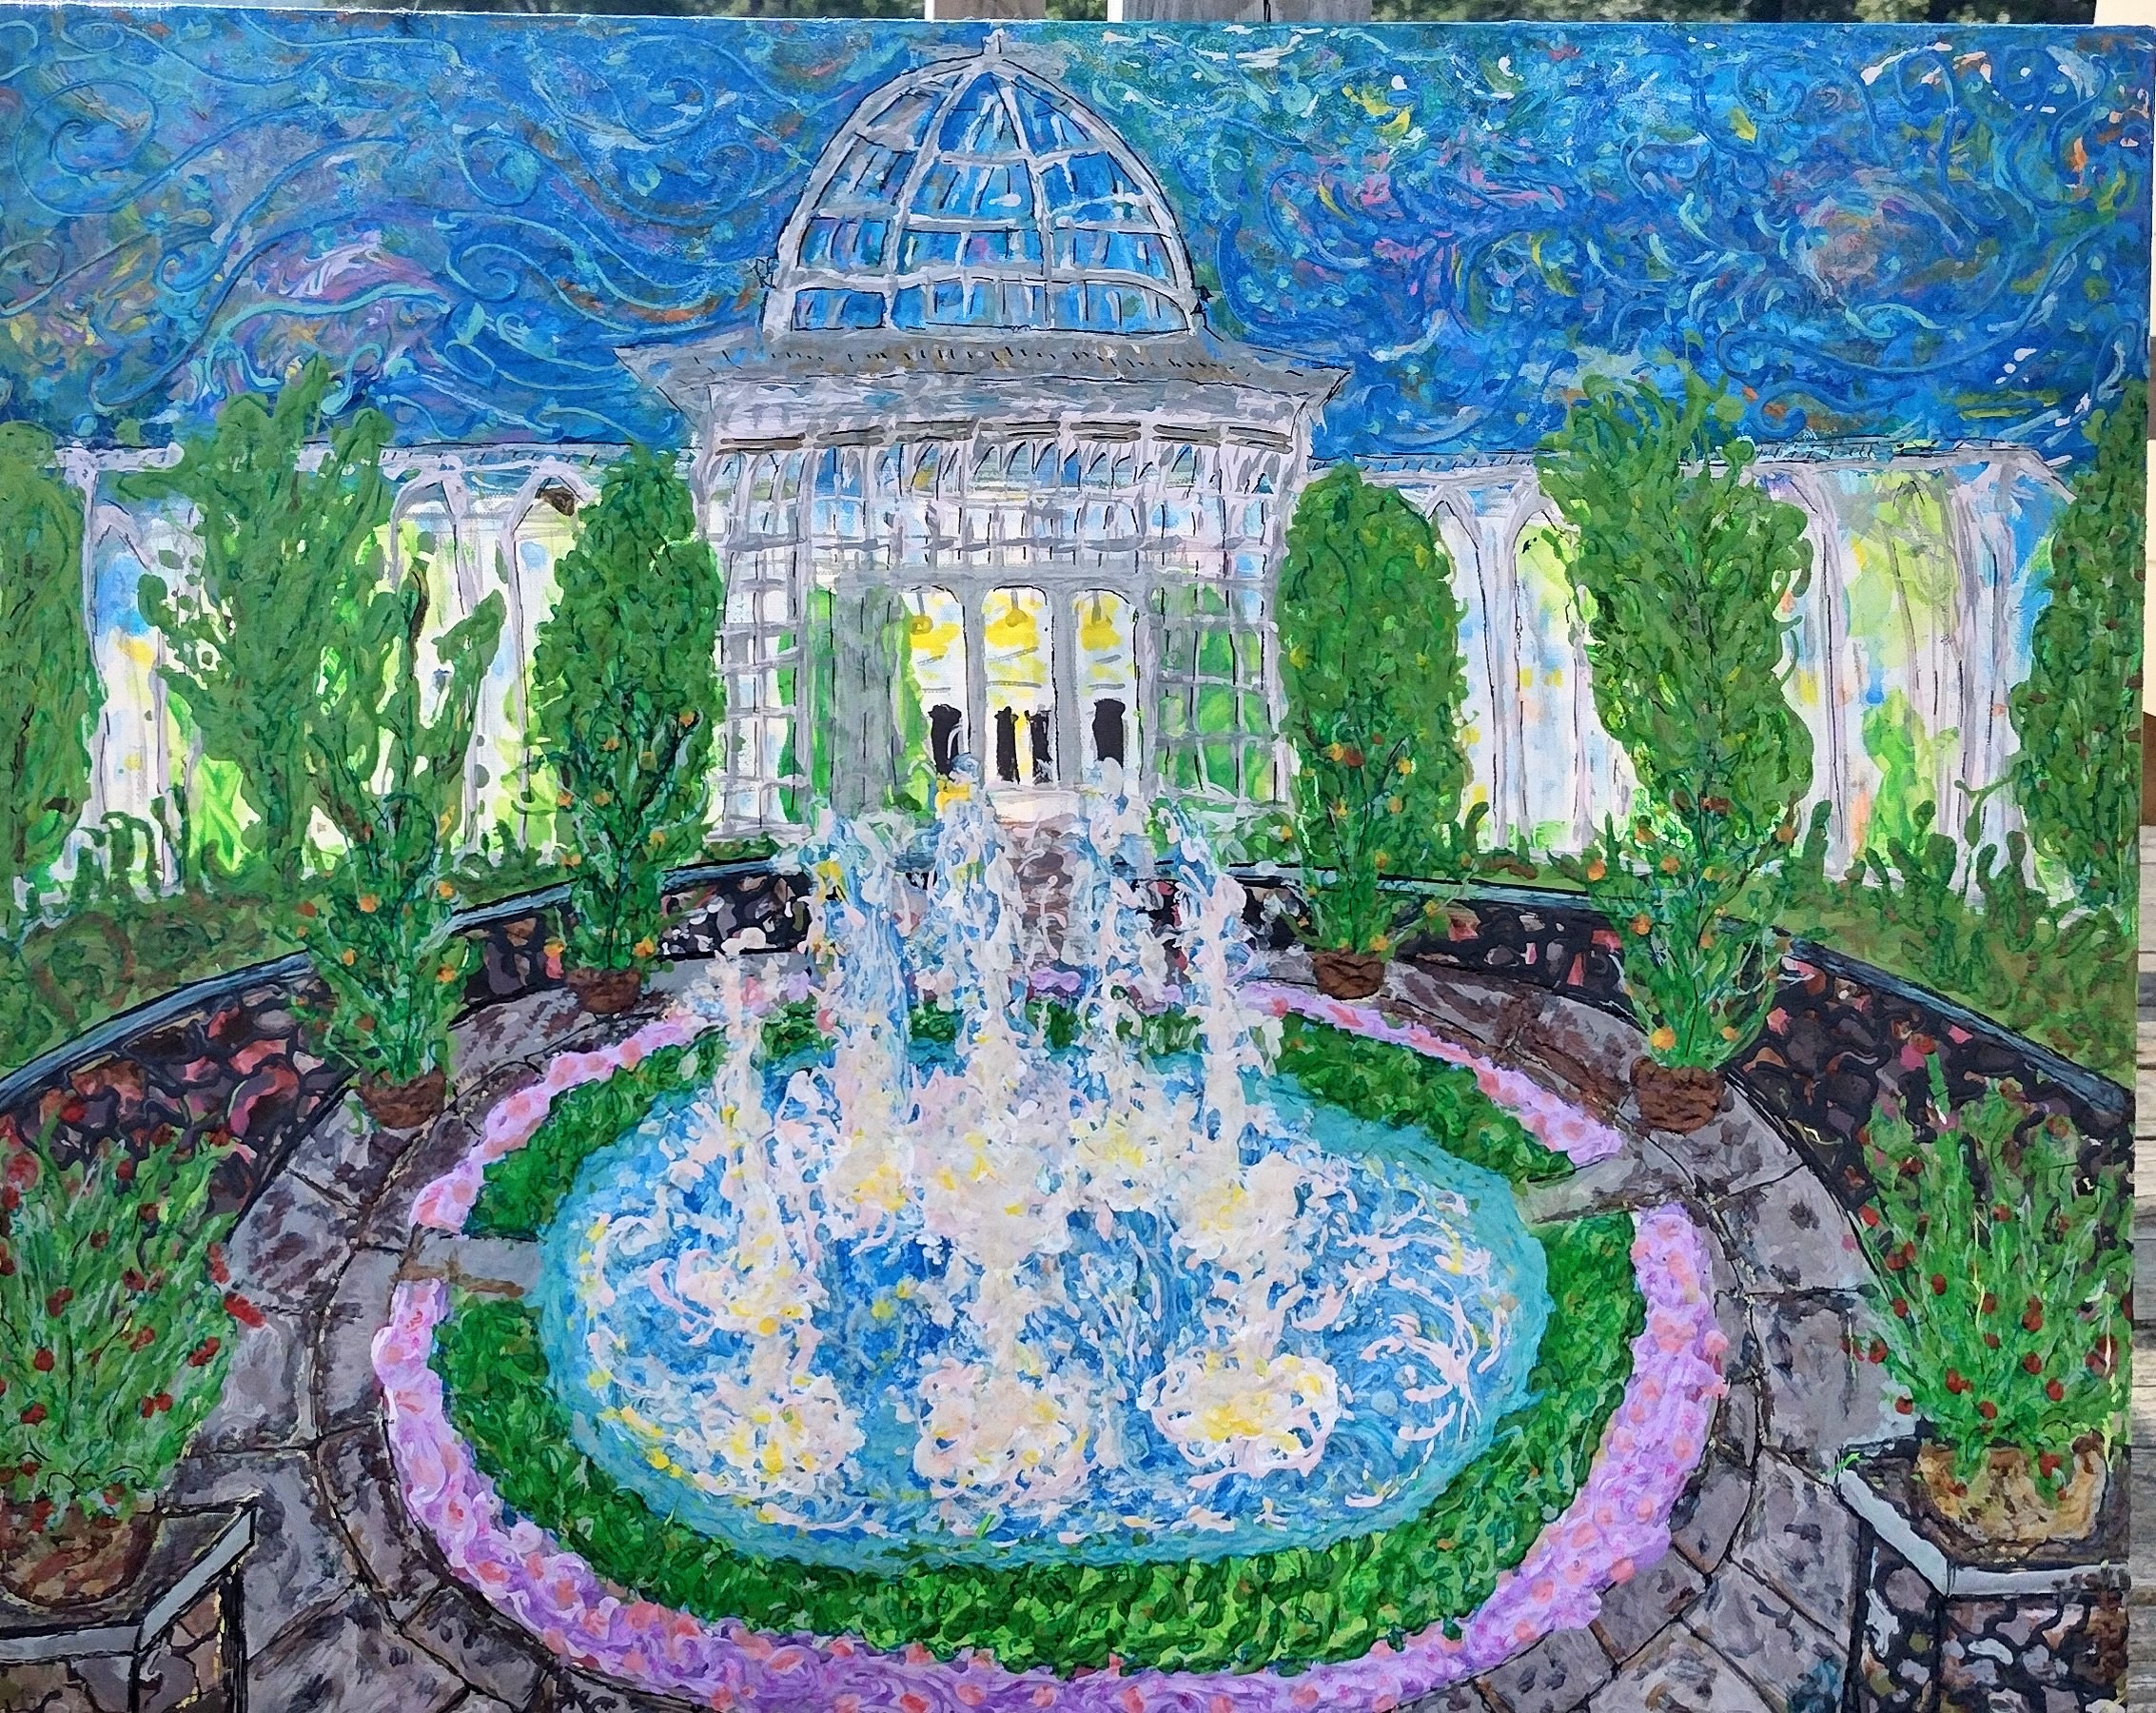 Lewis Ginter Botanical Gardens, work by Wendy Young (MG: September 2022)